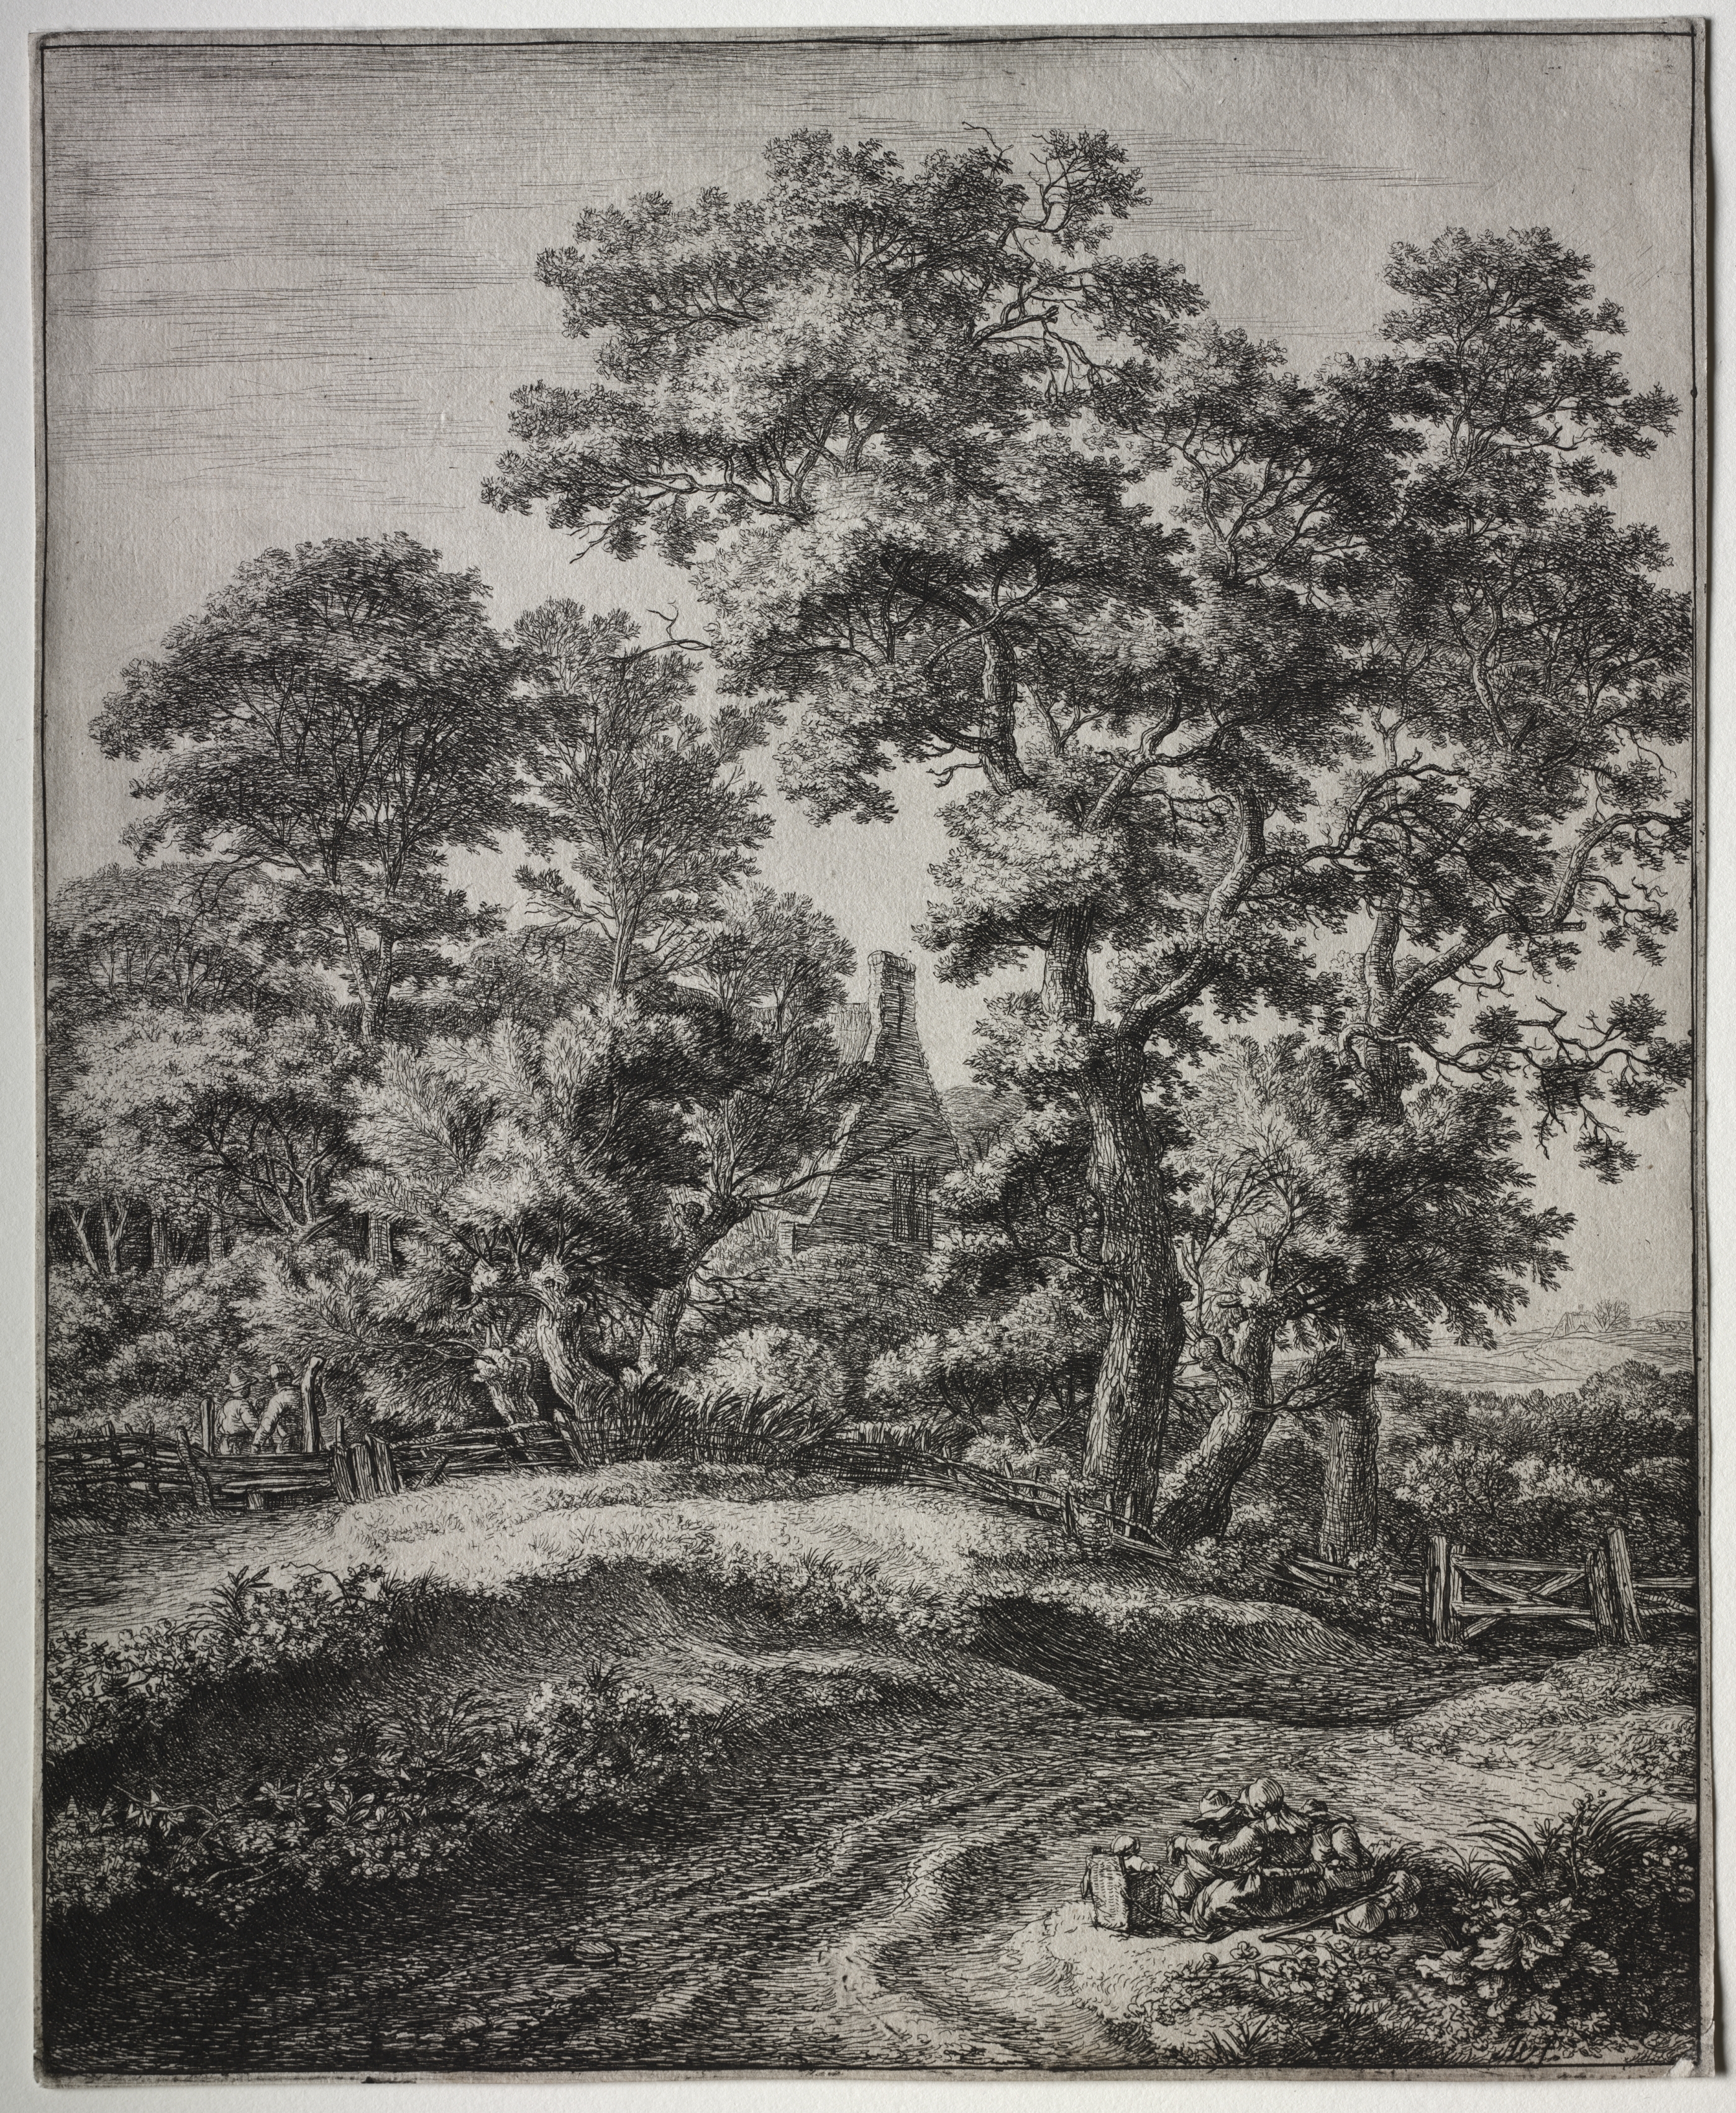 Six Large Upright Landscapes: A Mother and Three Children at Rest